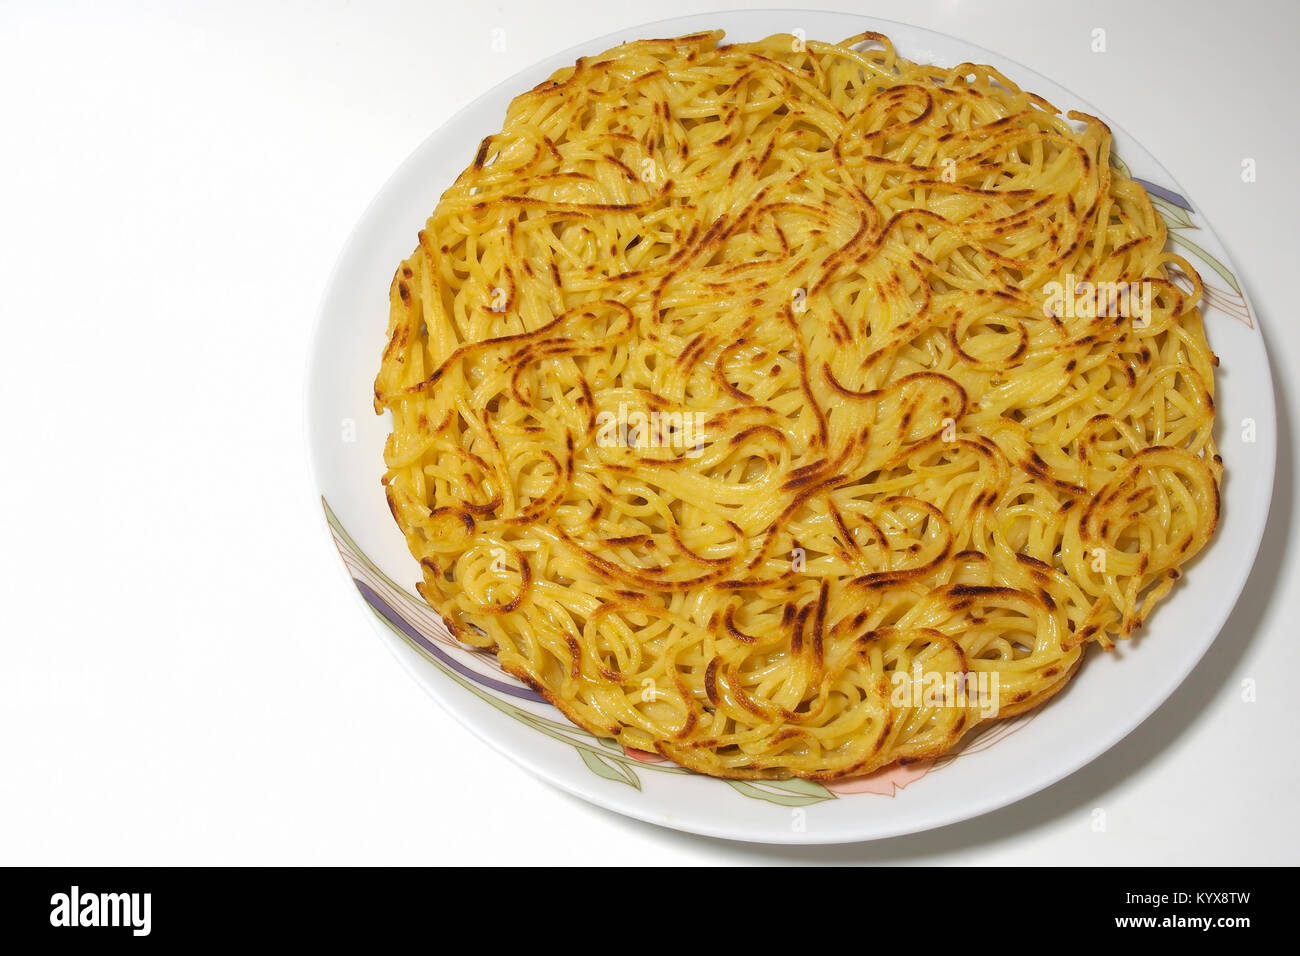 Vegan food. The famous Italian dish 'Frittata of spaghetti' in a vegan version replacing the eggs with a mixture of chickpea flour and water. Stock Photo